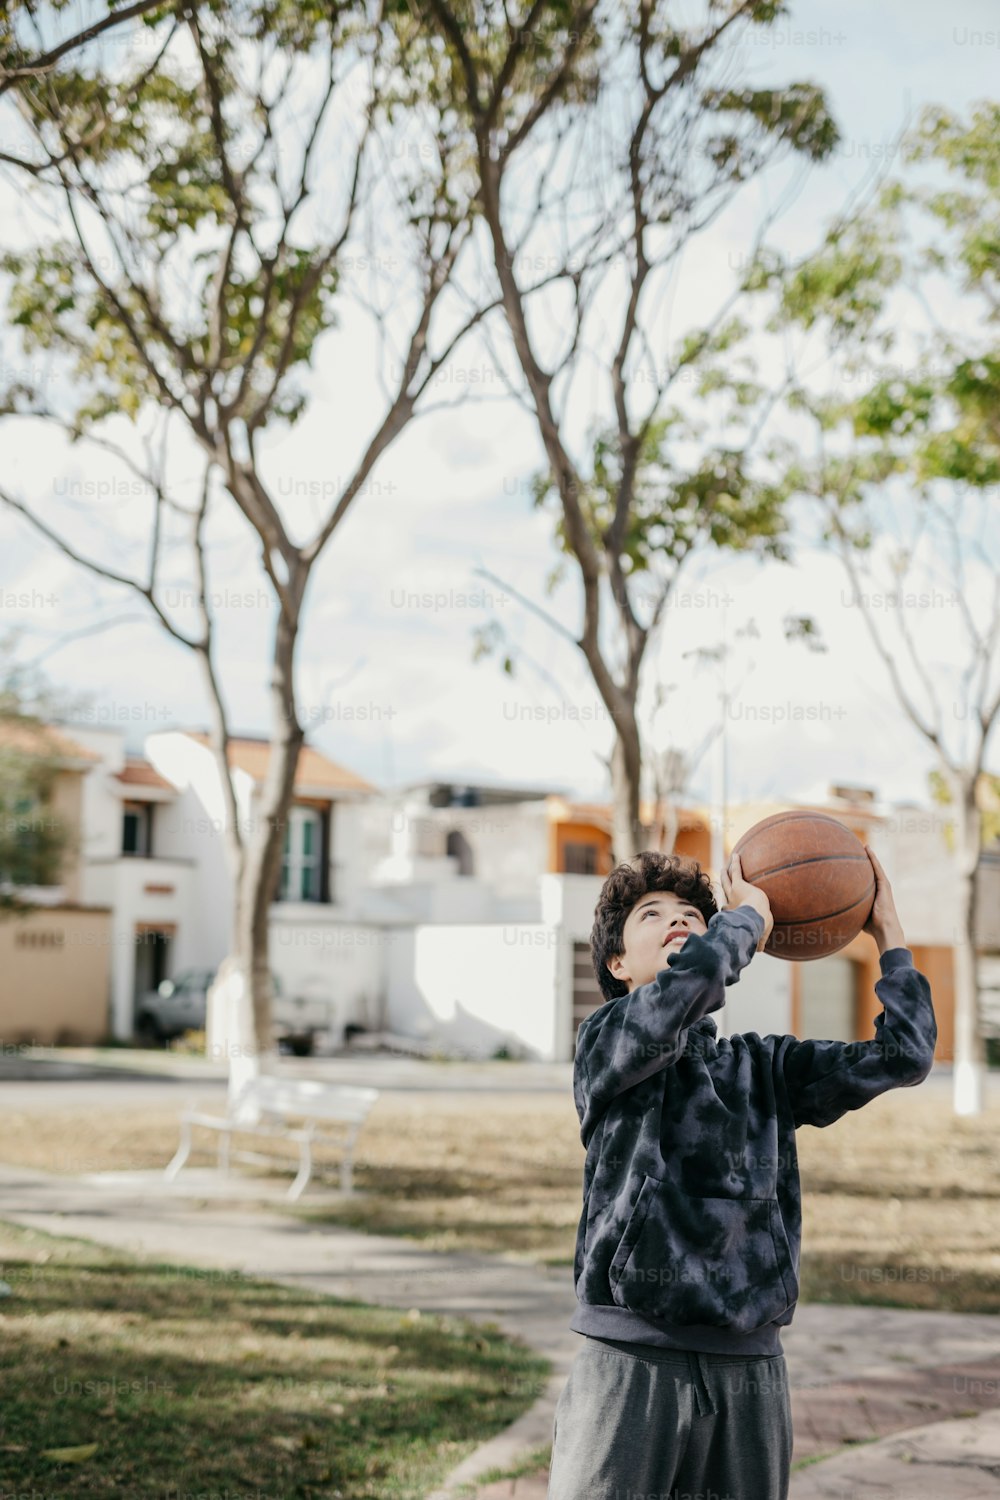 a young boy holding a basketball up to his face